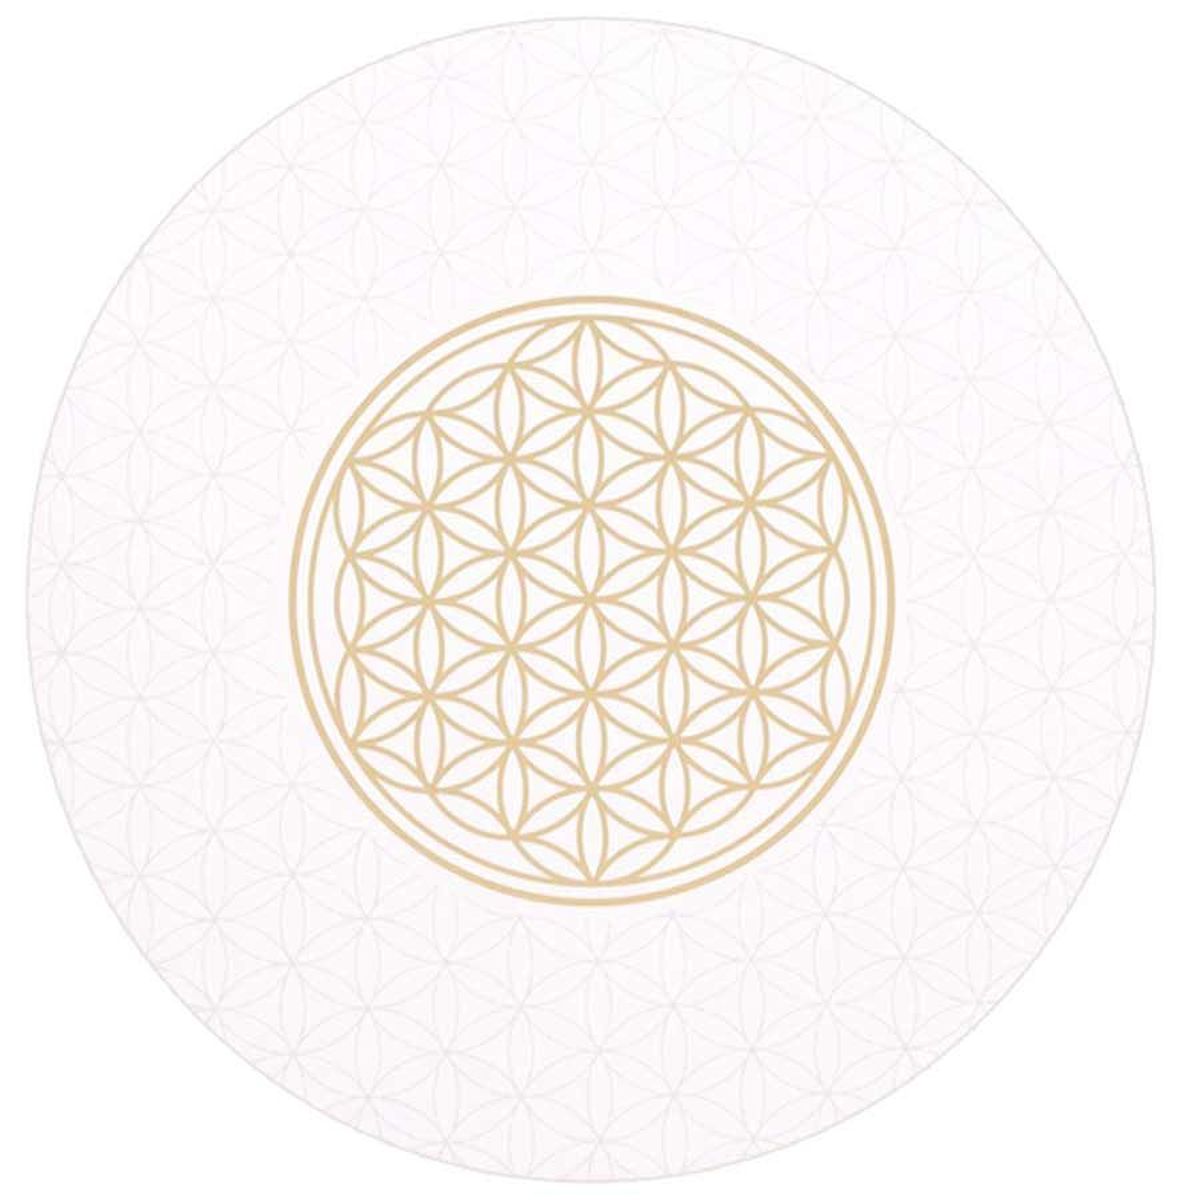 Flower of Life Set of 6 coasters